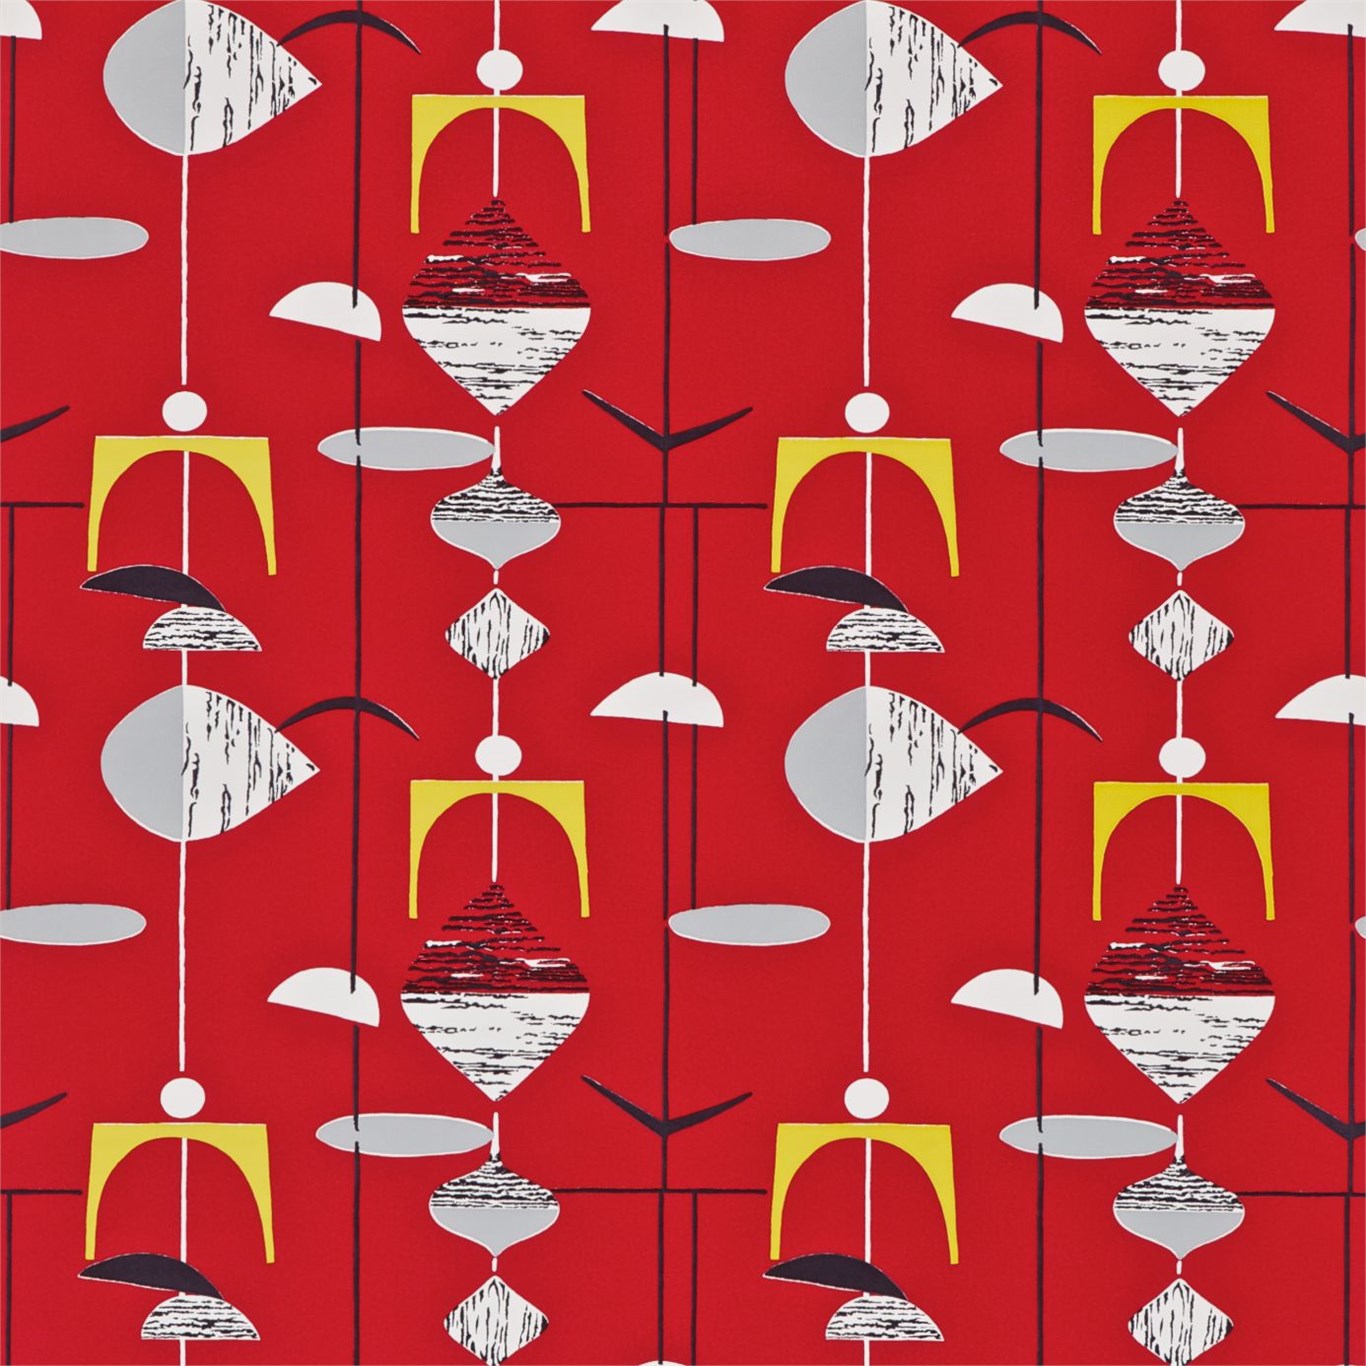 Mobiles, A Wallpaper By Sanderson, Part Of The 50s - Marian Mahler - HD Wallpaper 